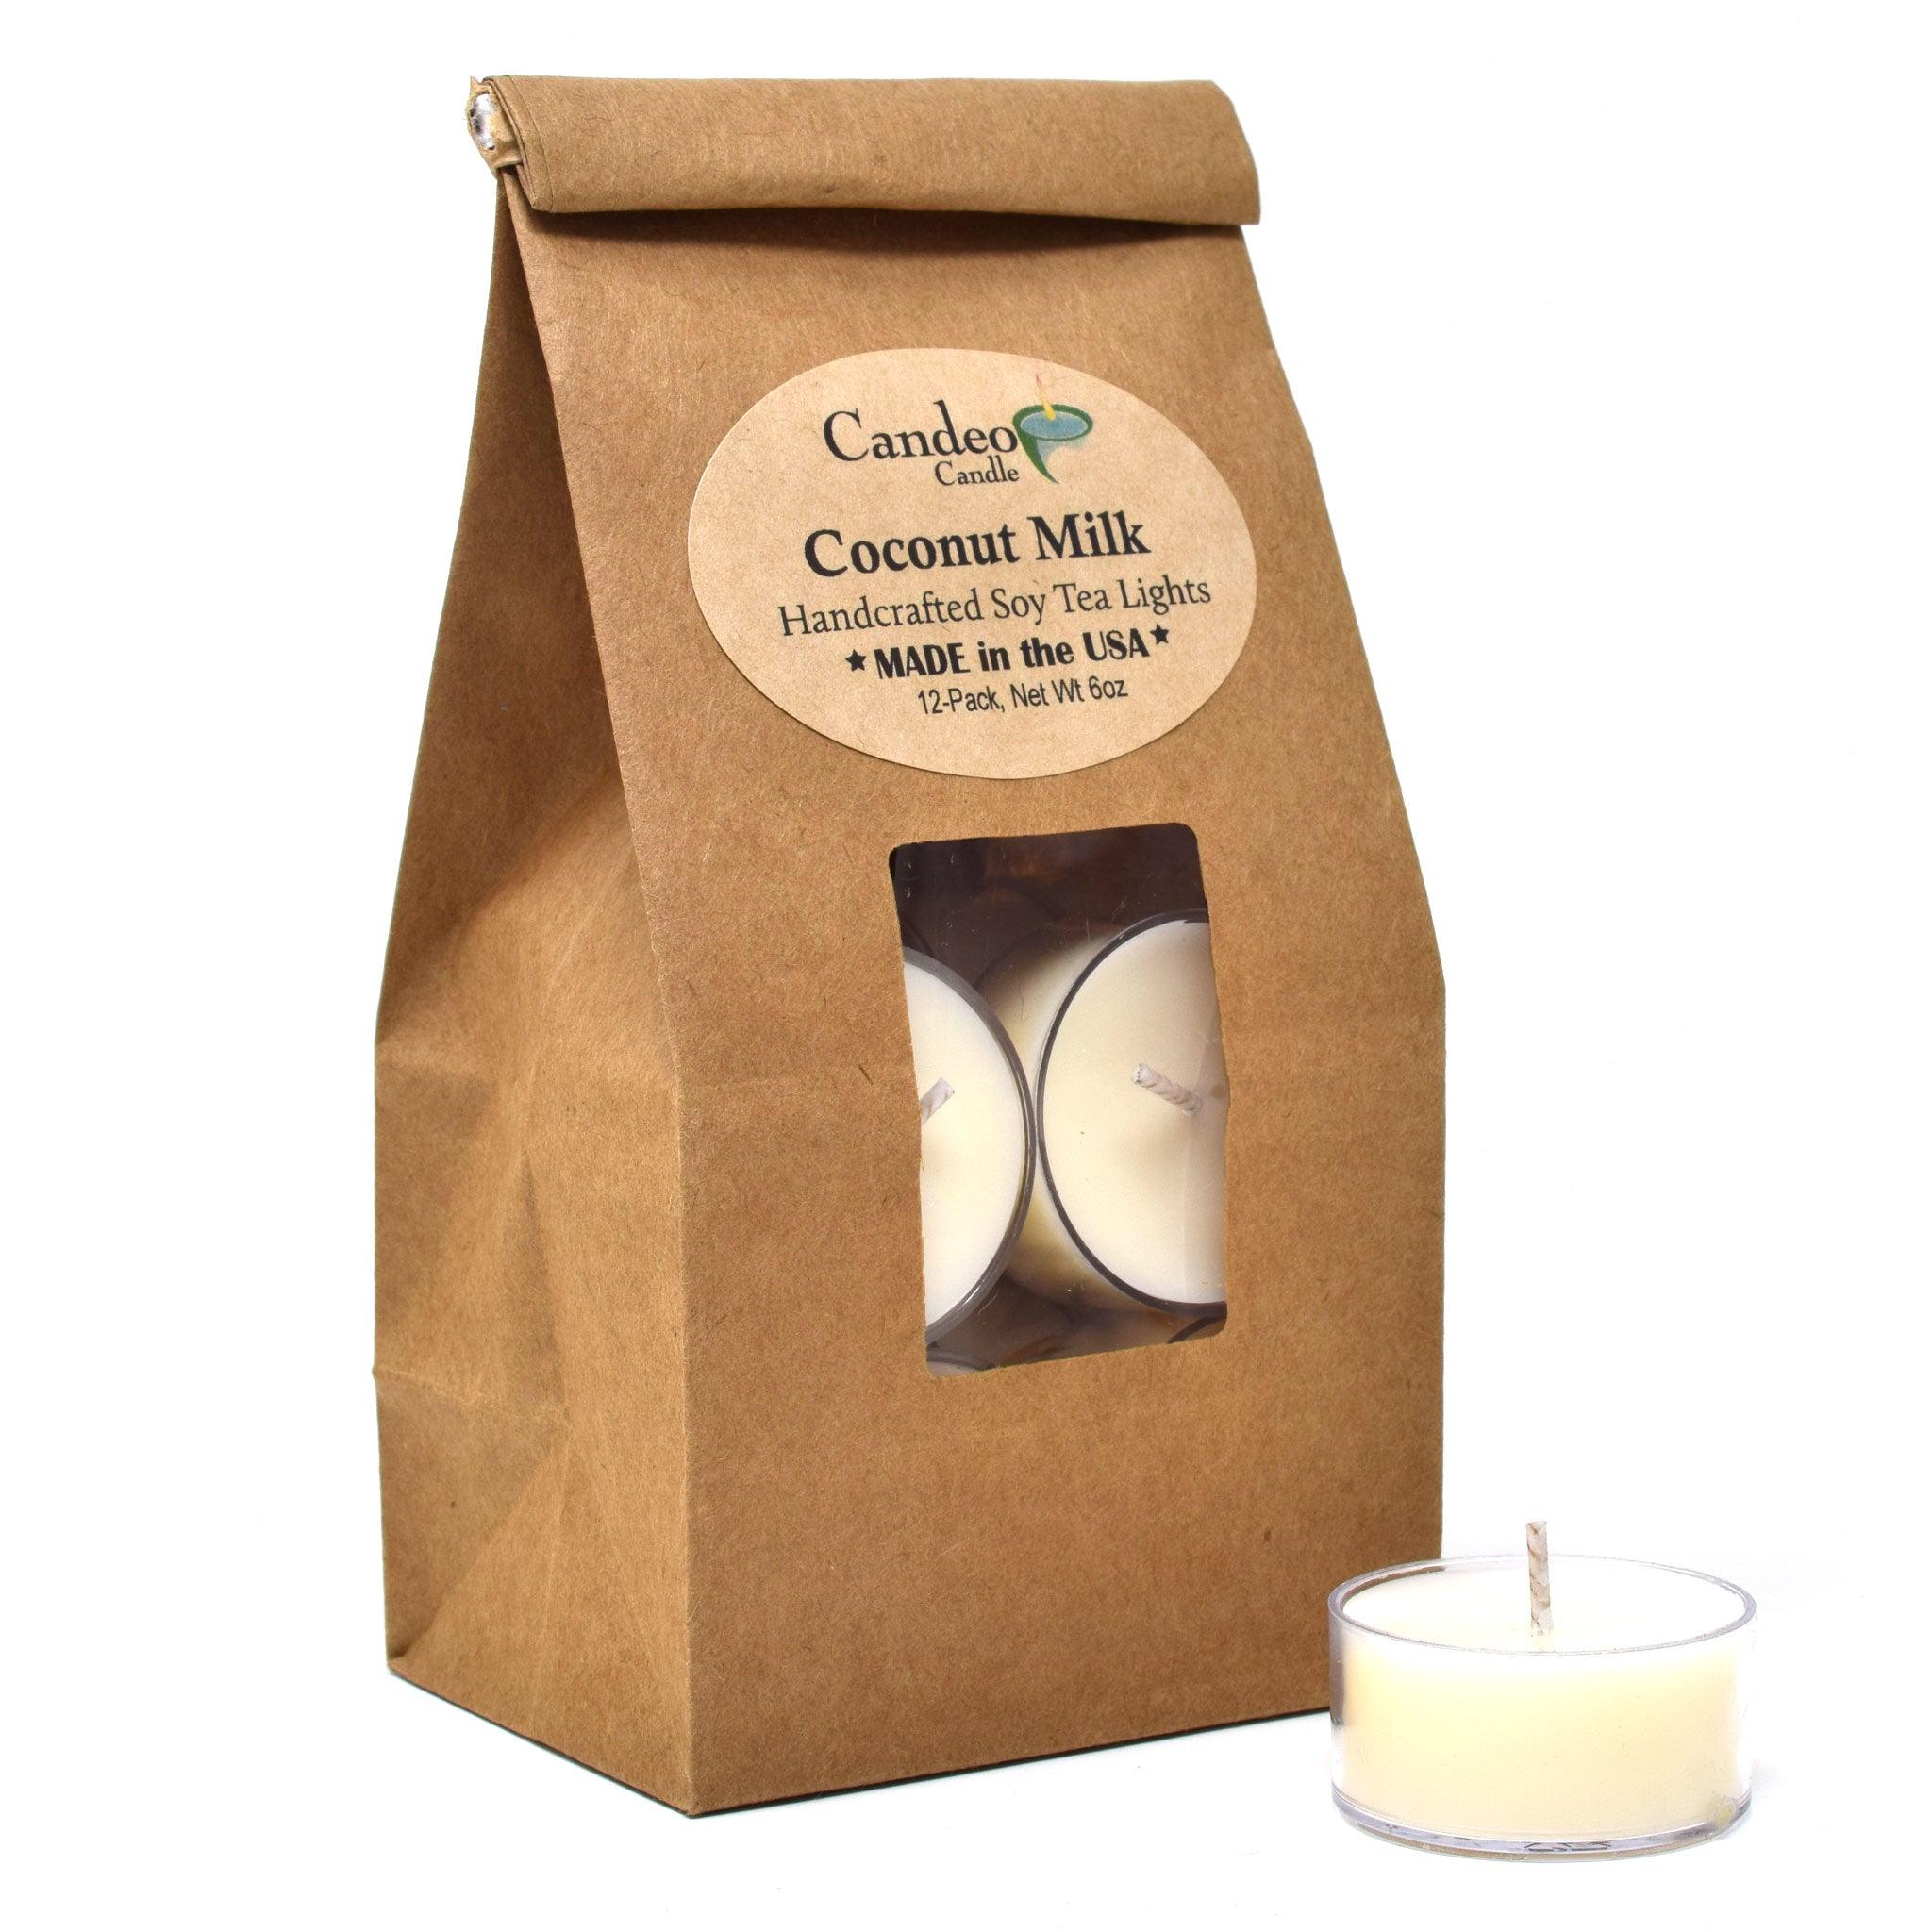 Coconut Milk, Soy Tea Light 12-Pack - Candeo Candle